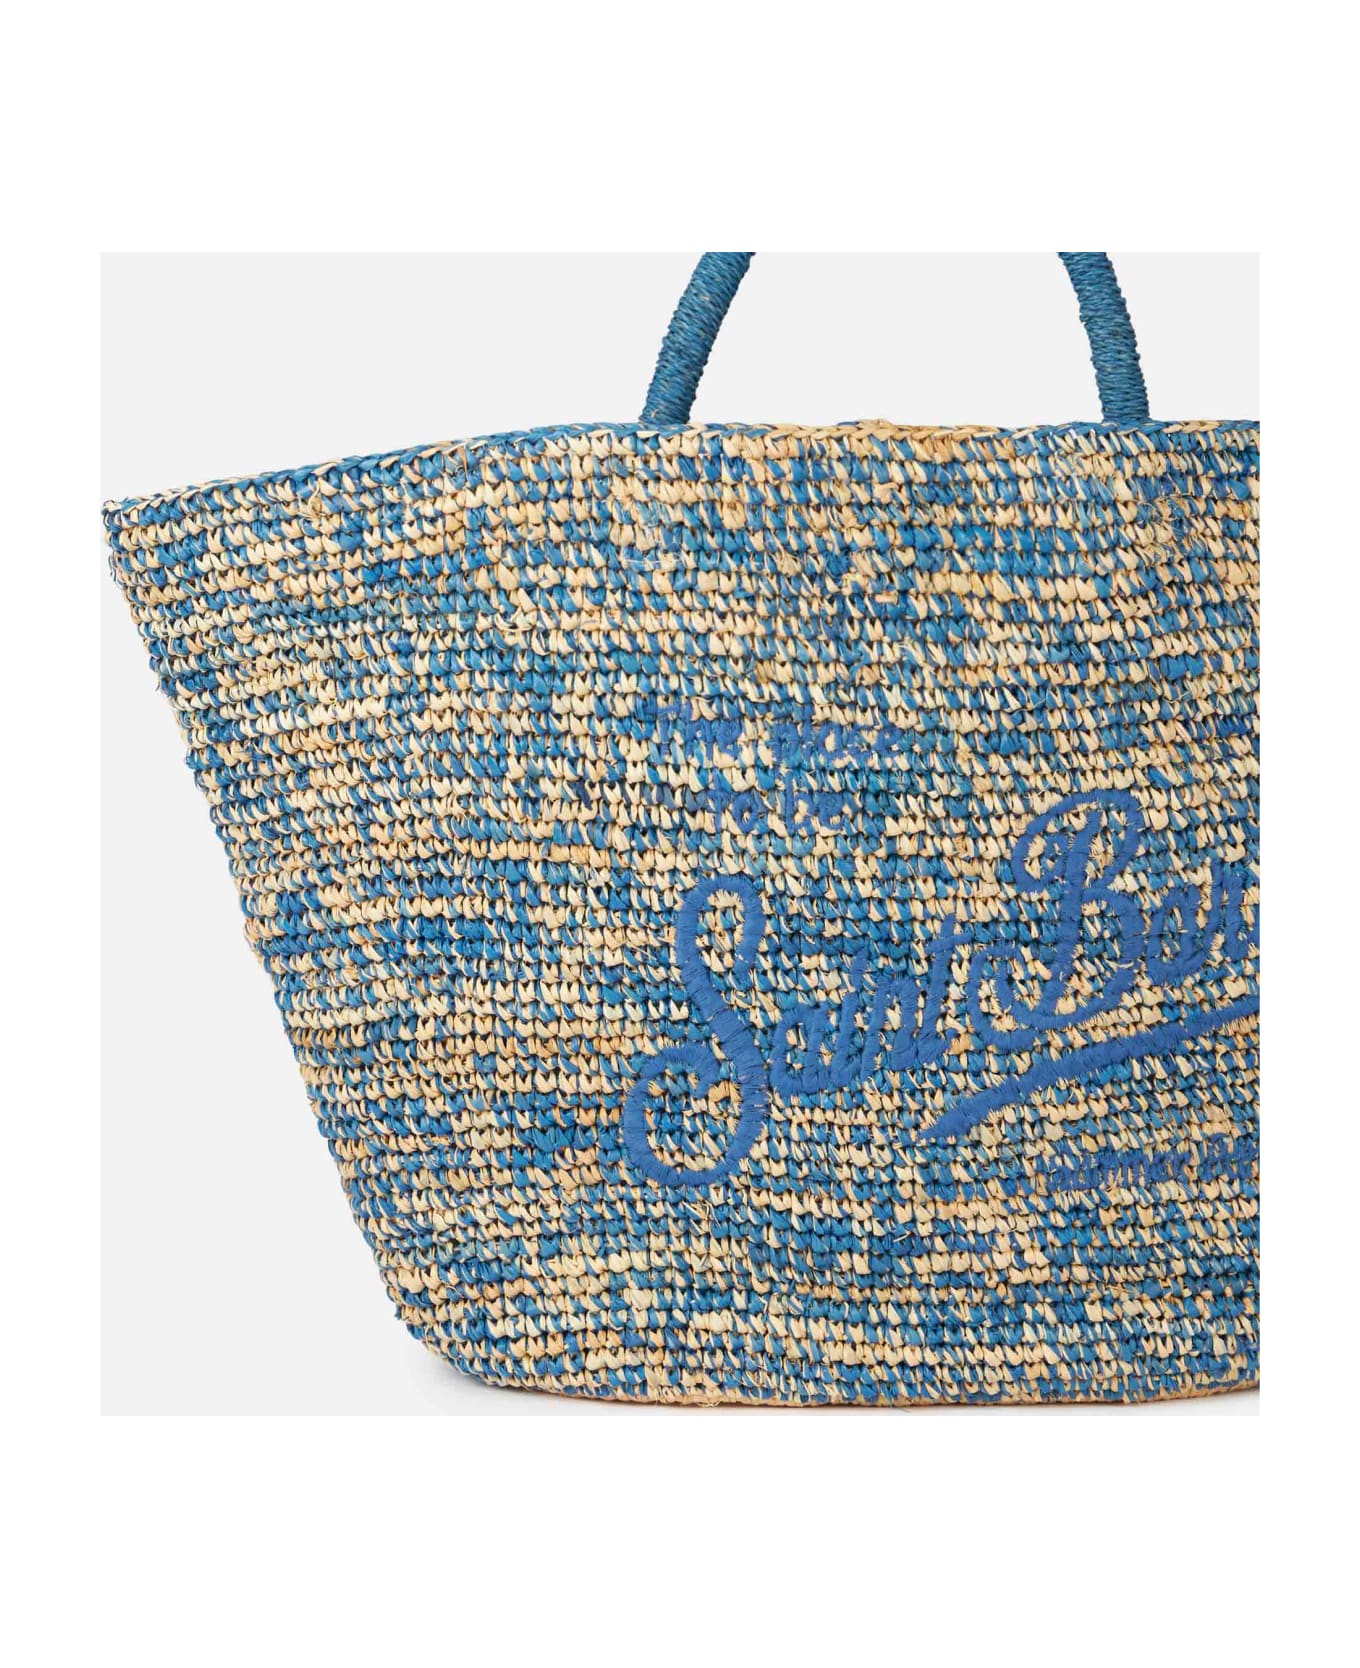 MC2 Saint Barth Raffia Blue And White Bag With Front Embroidery - BLUE トートバッグ